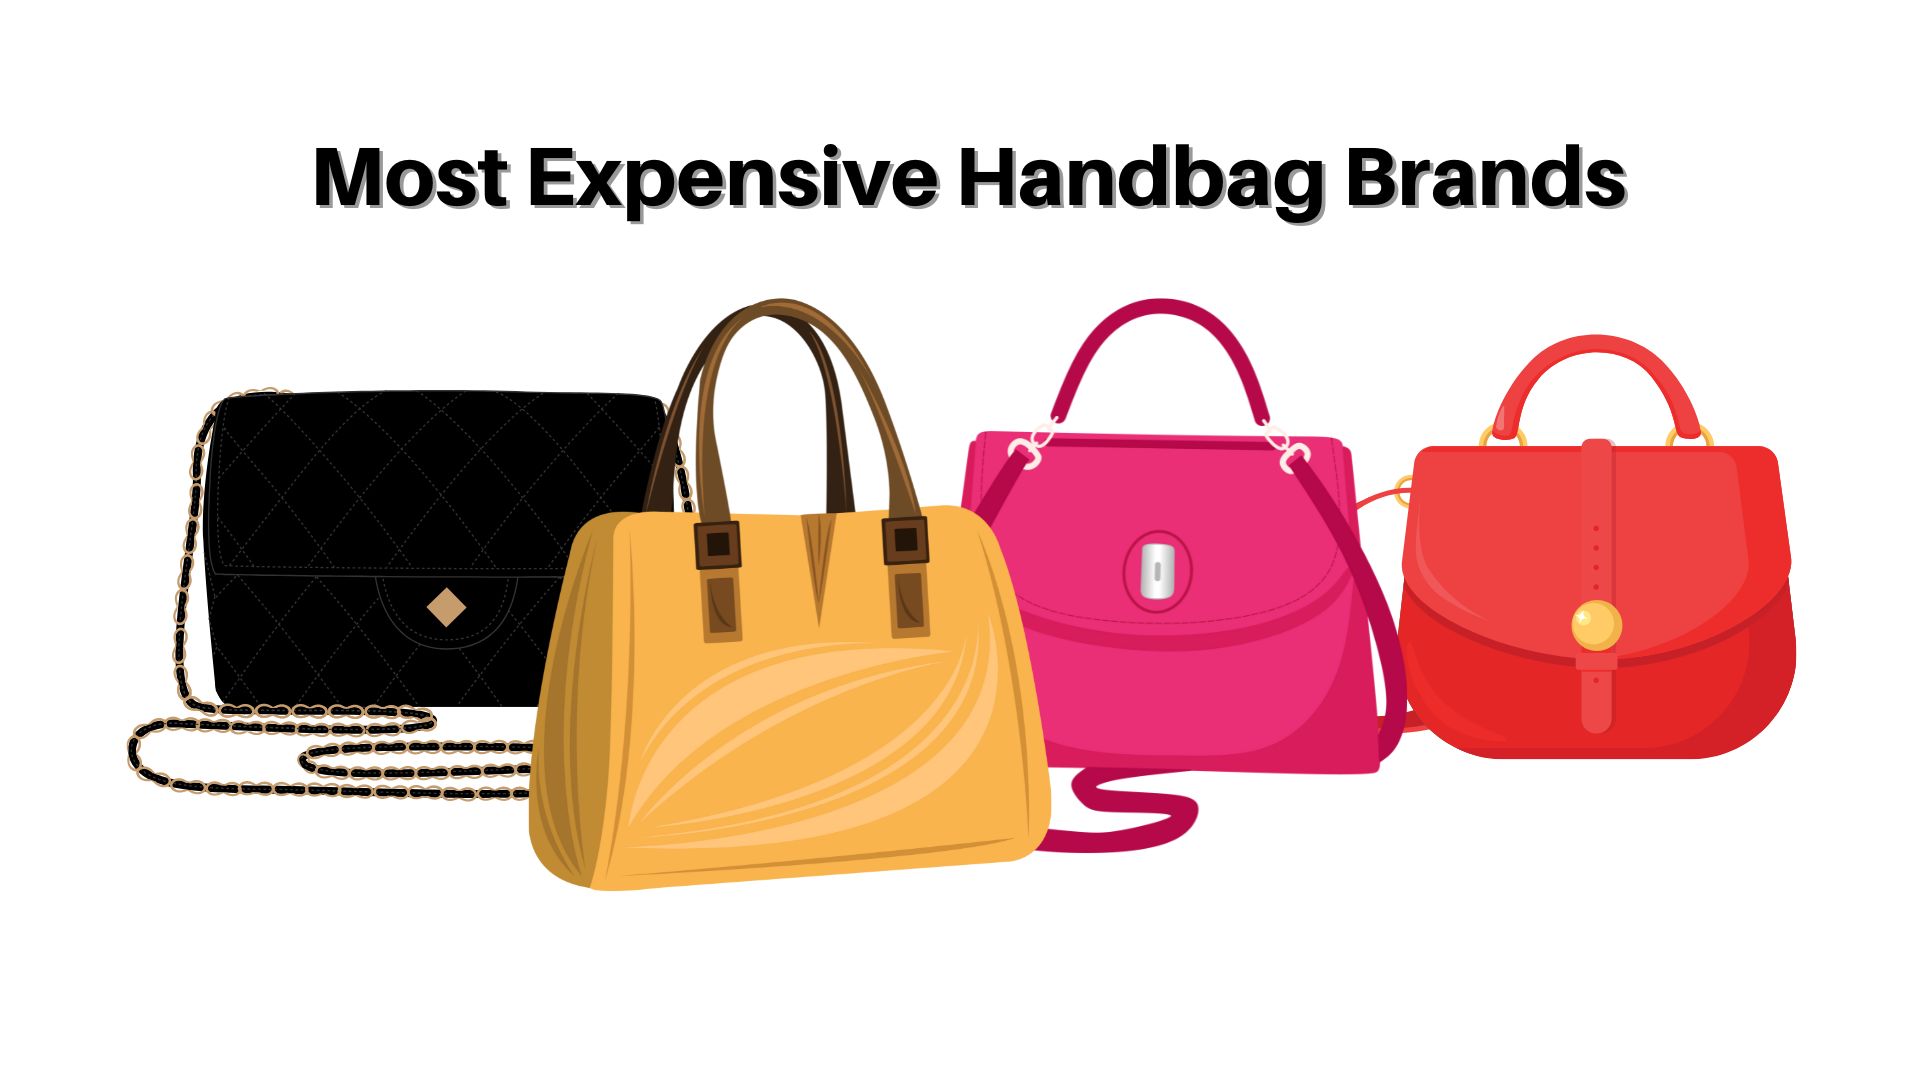 Top 10 Most Expensive Handbag Brands In The World